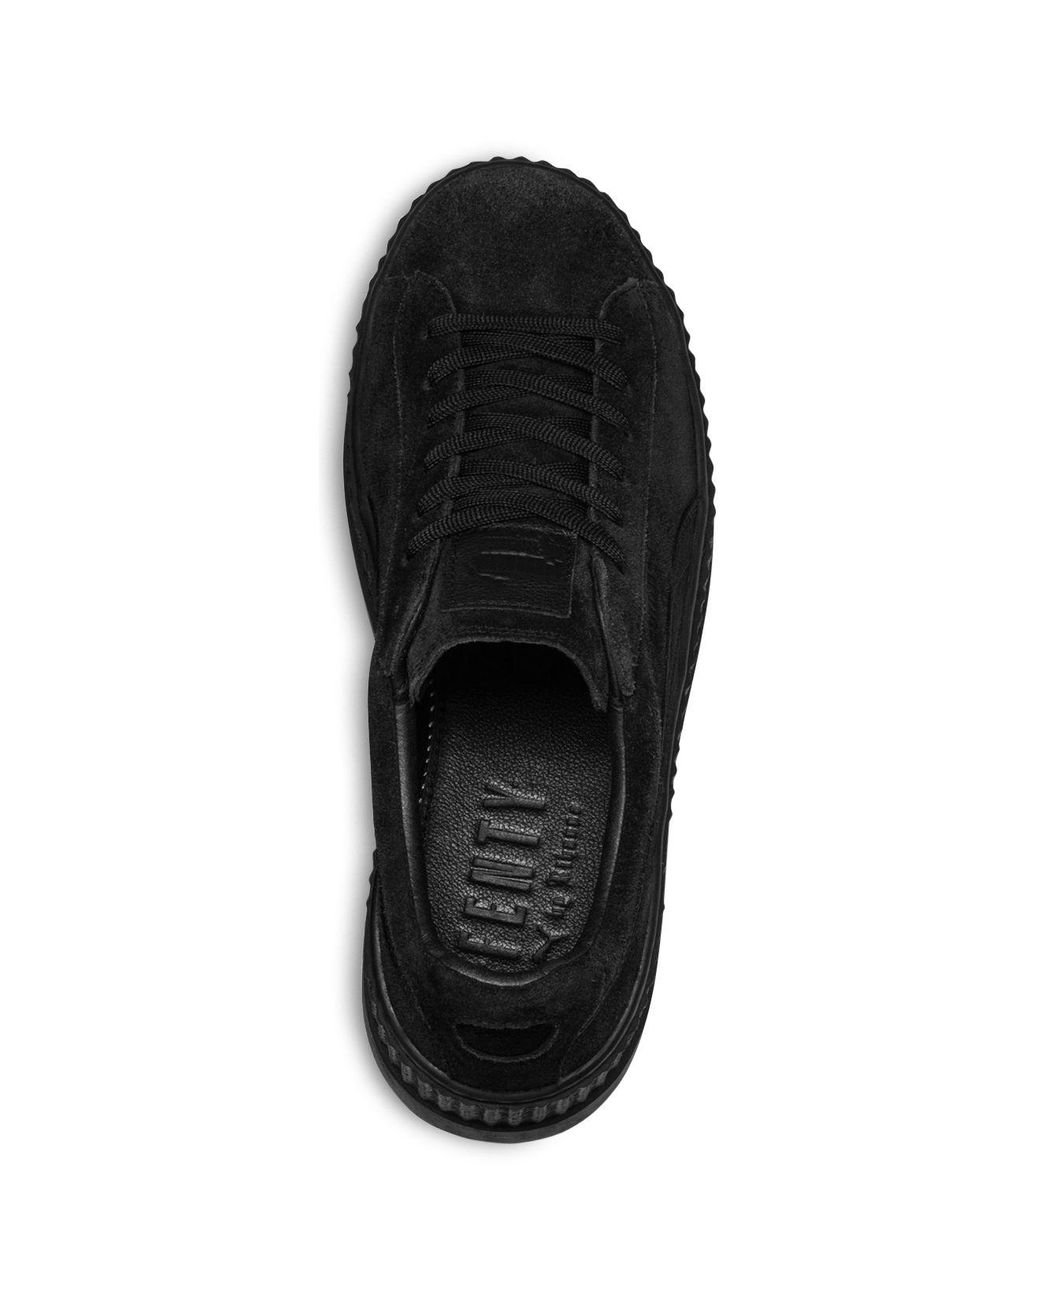 PUMA Suede Cleated Sneakers Black for Men | Lyst